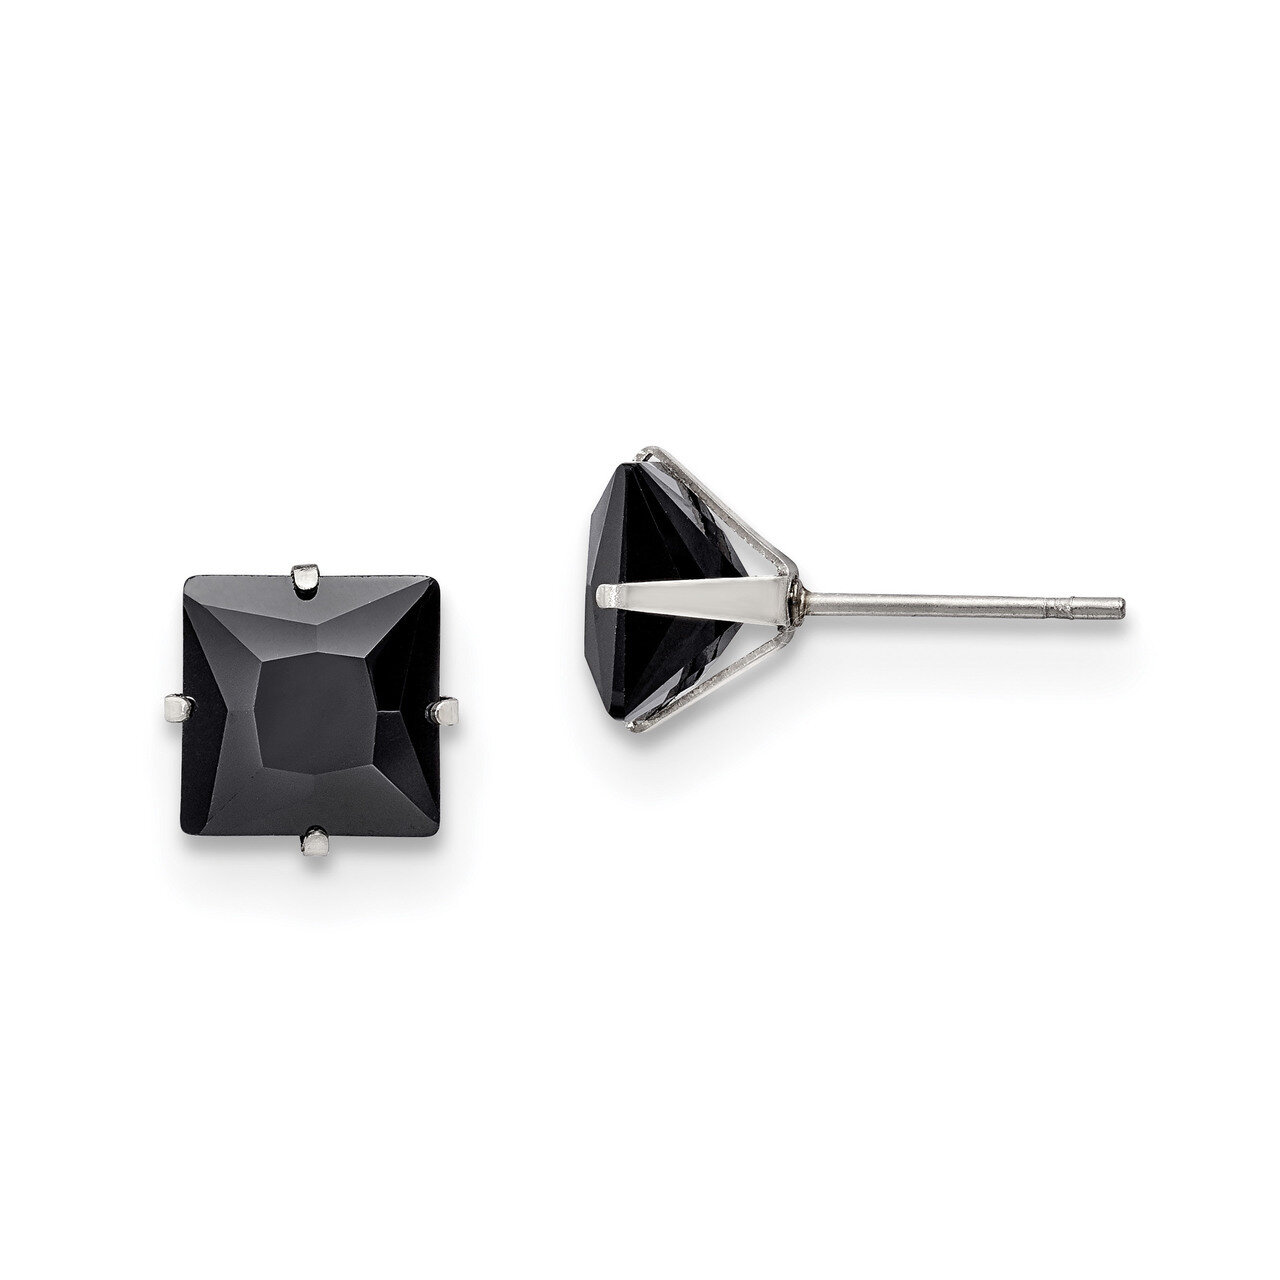 8mm Black Square CZ Stud Post Earrings Stainless Steel Polished SRE1113